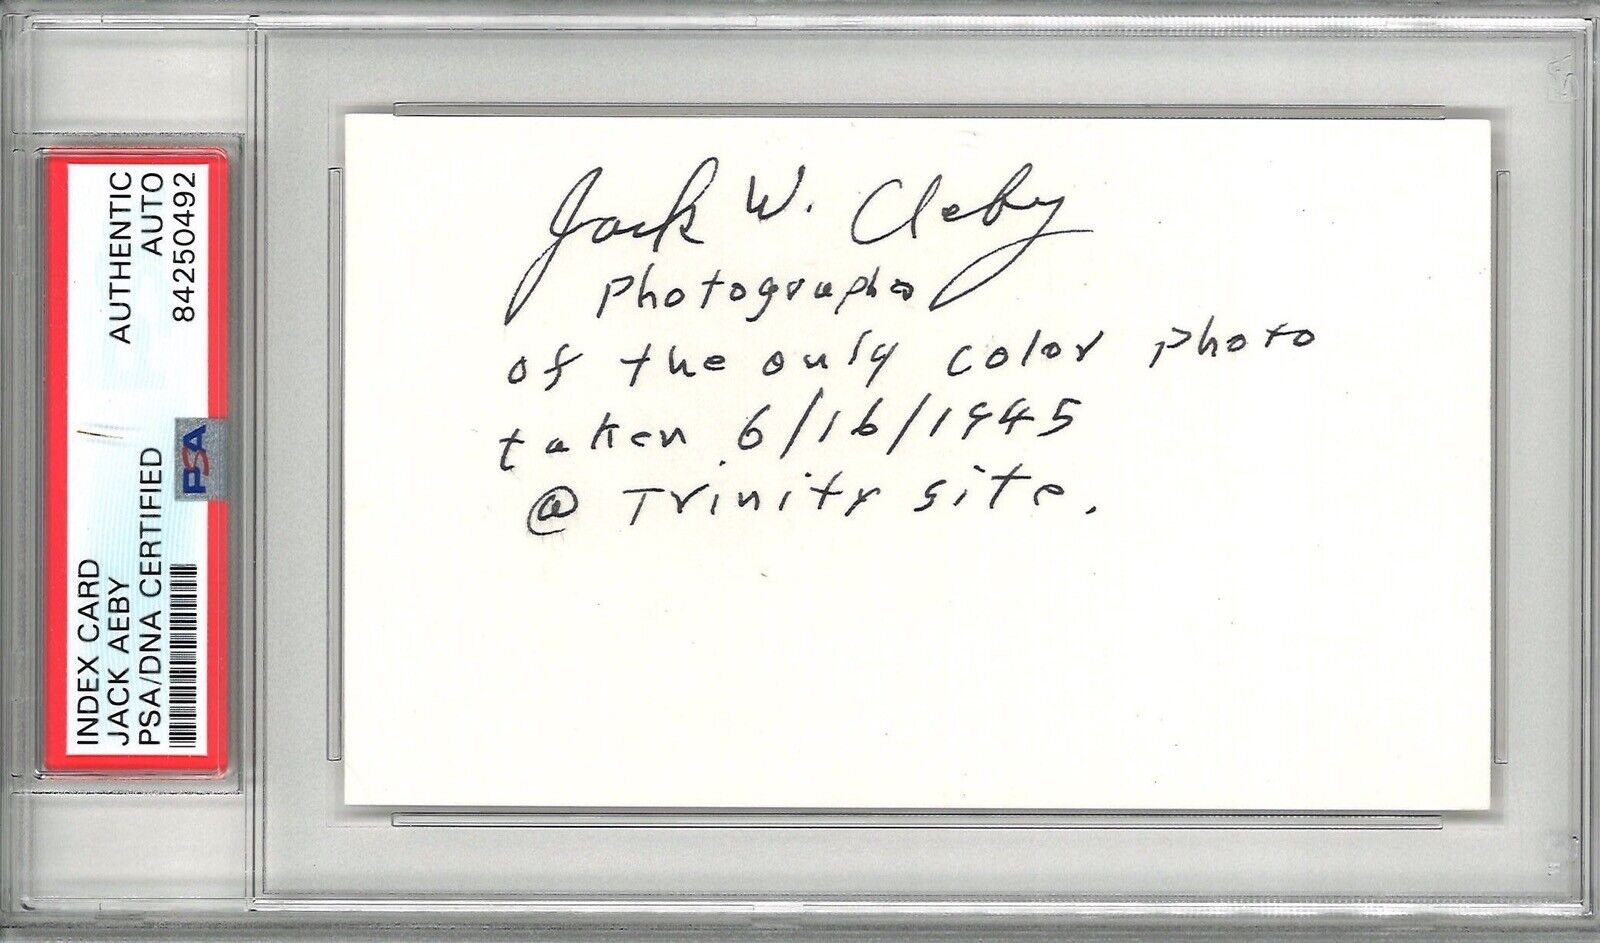 JACK AEBY SIGNED INDEX CARD PSA DNA 84250492 (D) TRINITY SITE PHOTOGRAPHER